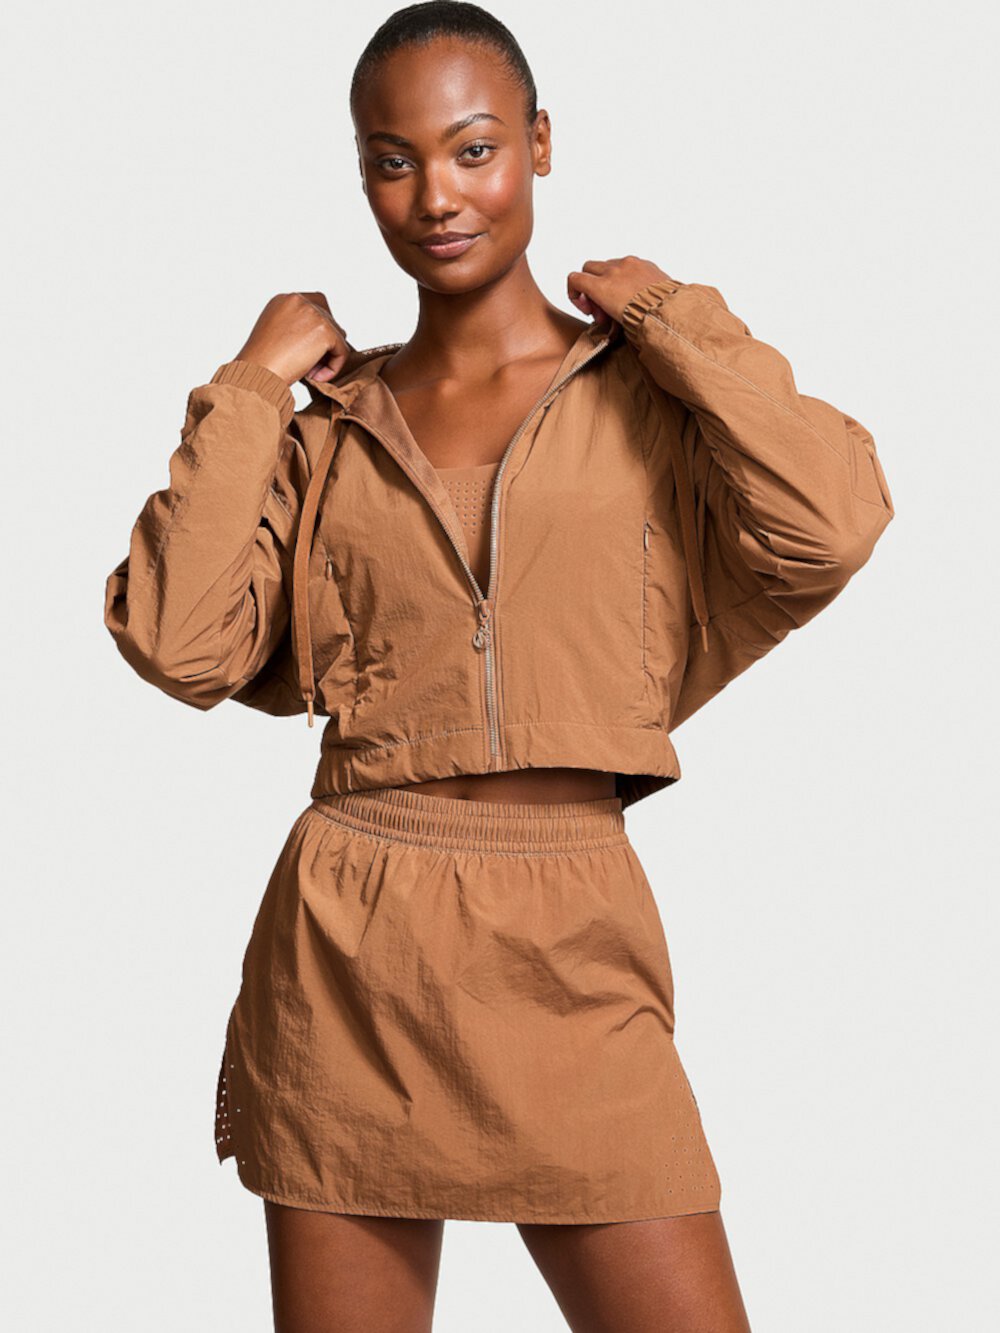 New Style! Parachute Cropped Weekender Jacket Victoria's Secret